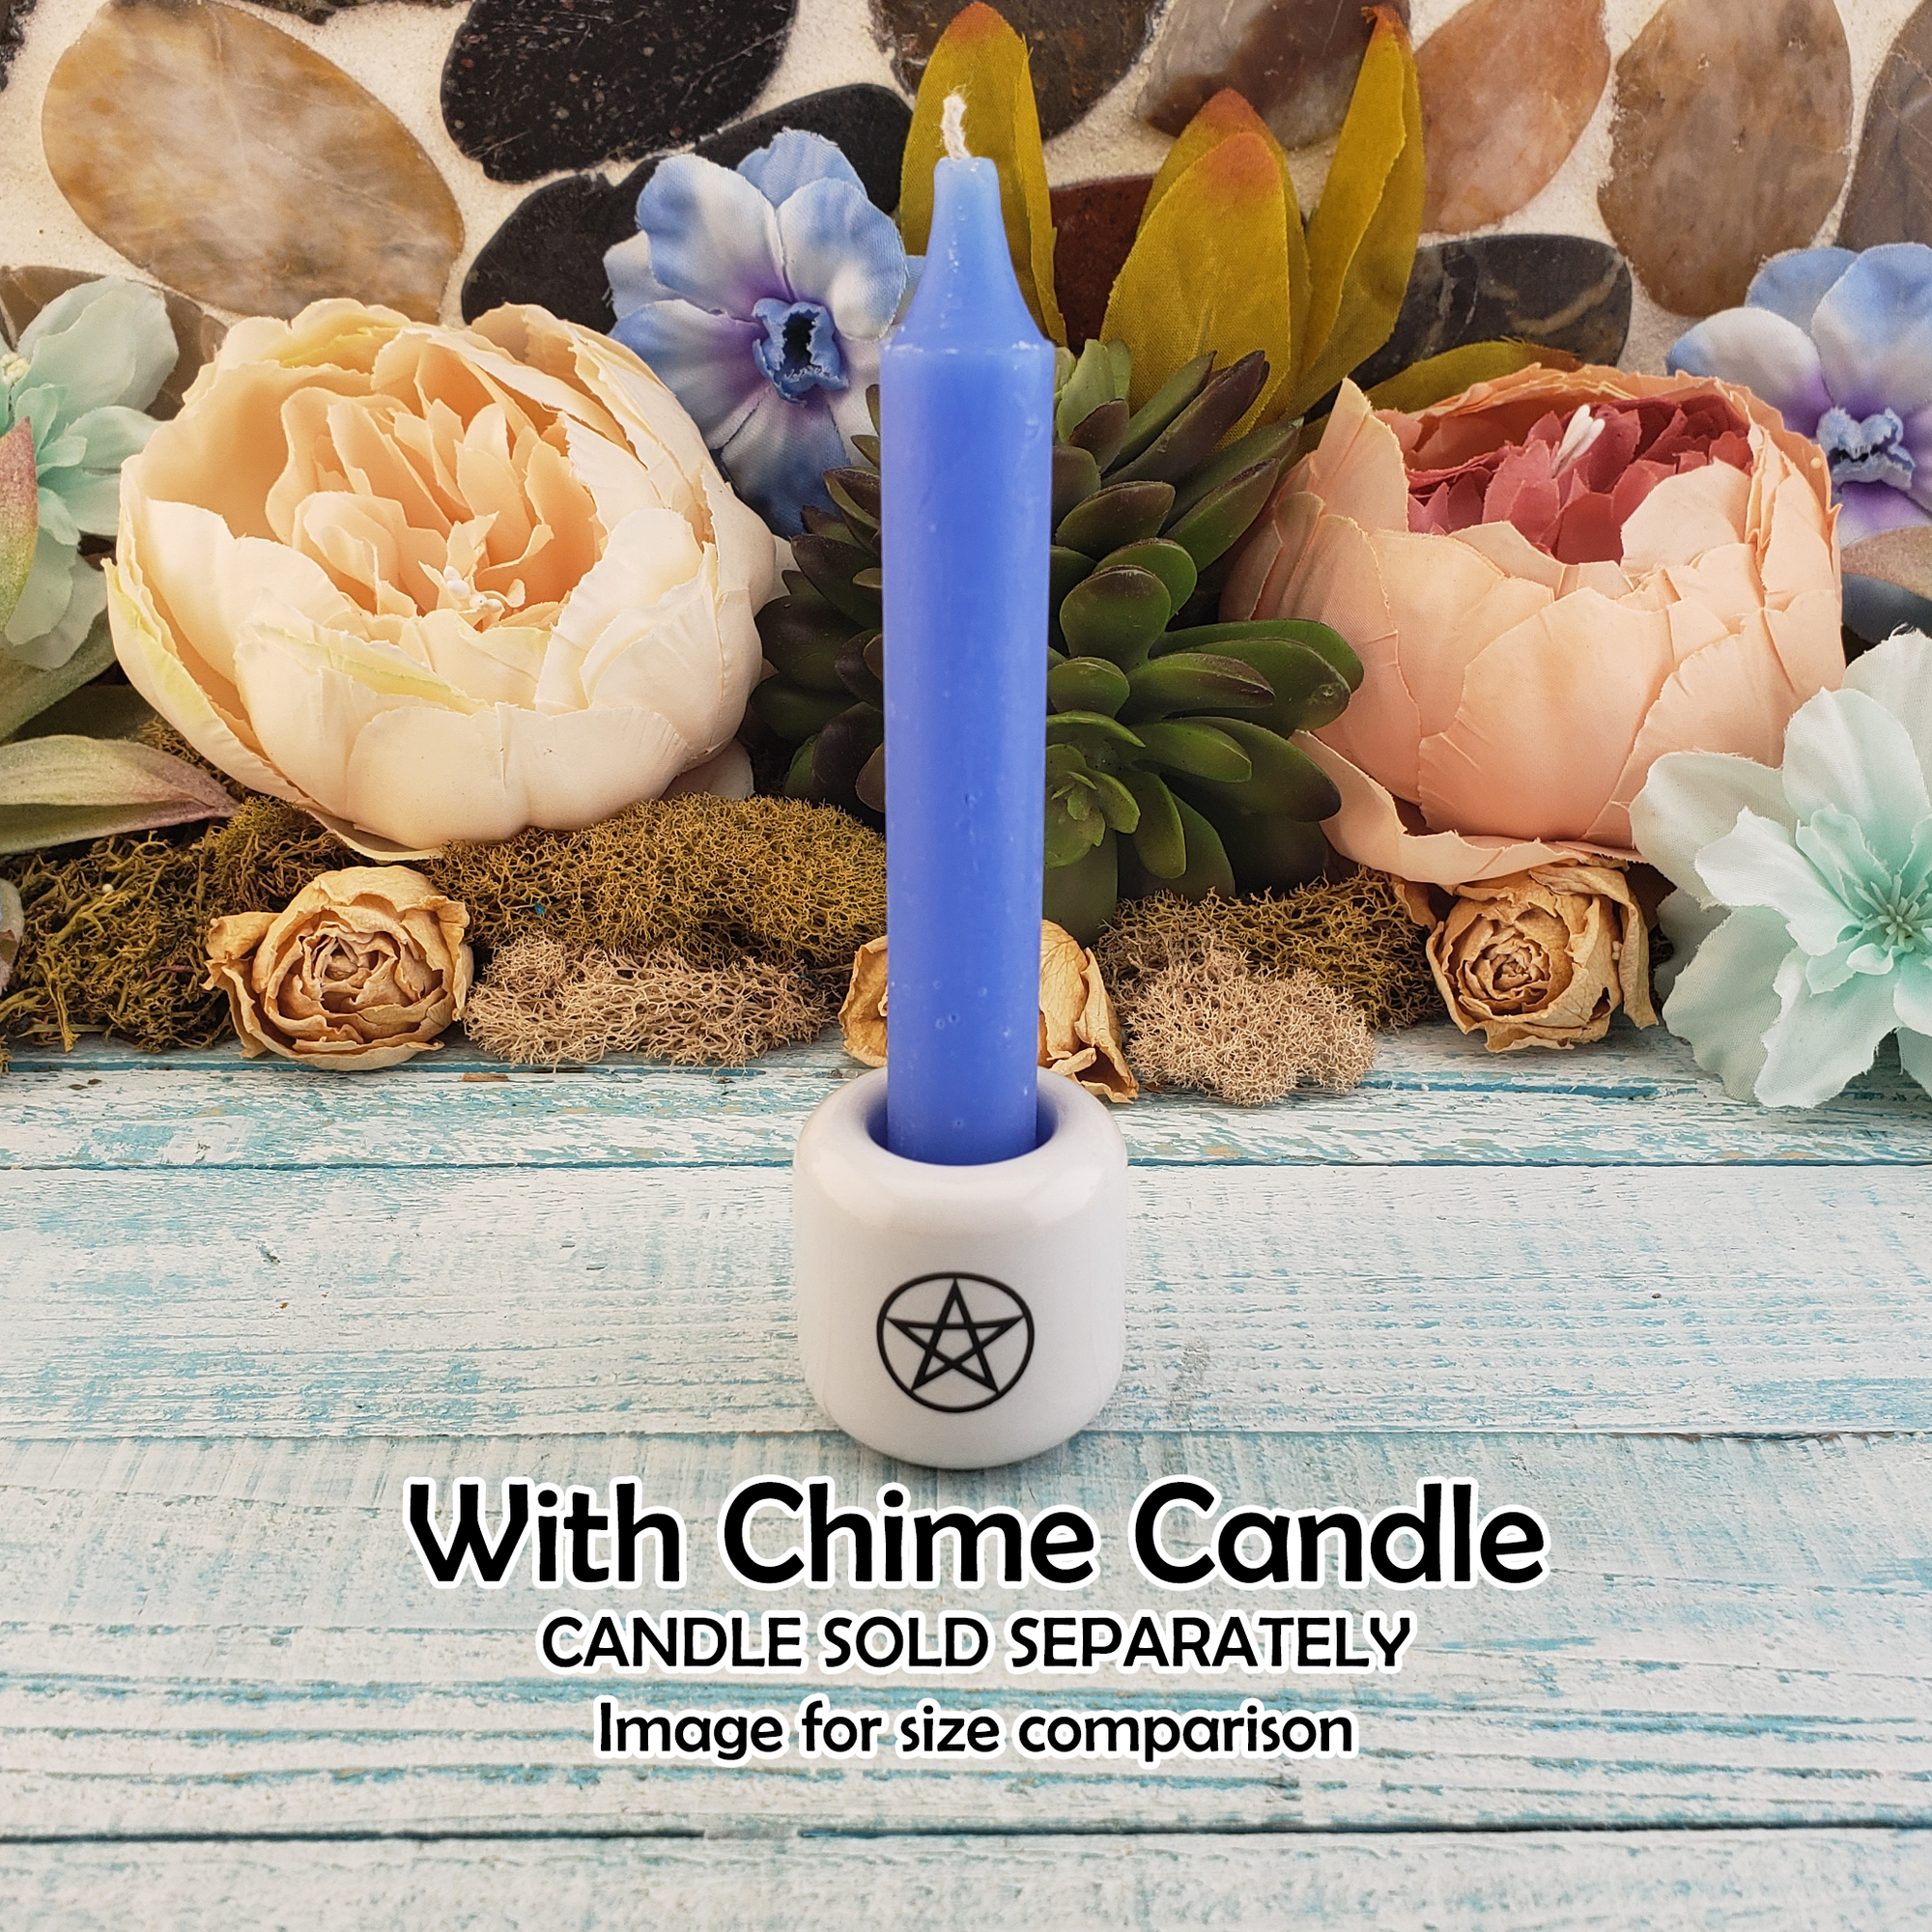 White Pentacle Ceramic Sphere Stand - Chime Candle Holder - Incense Holder - with Chime Candle for Size Comparison